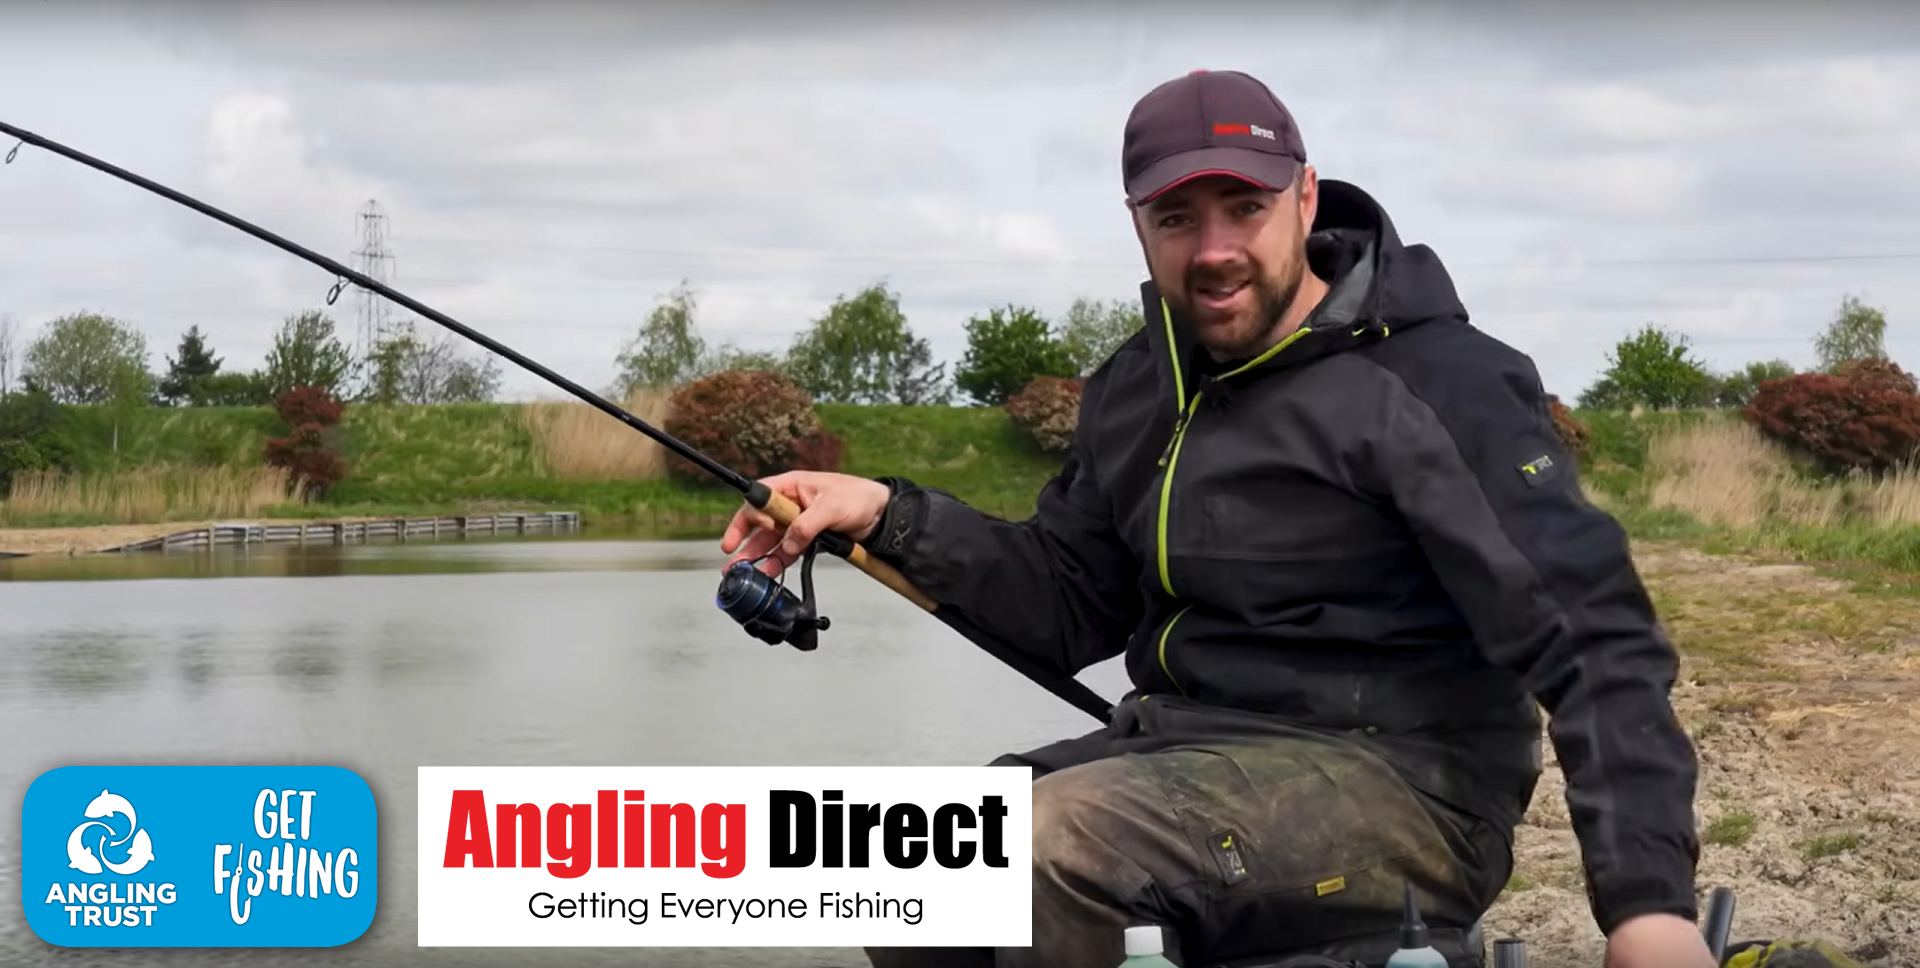 Get Fishing | Stephen Crowe Get Fishing and Angling Direct